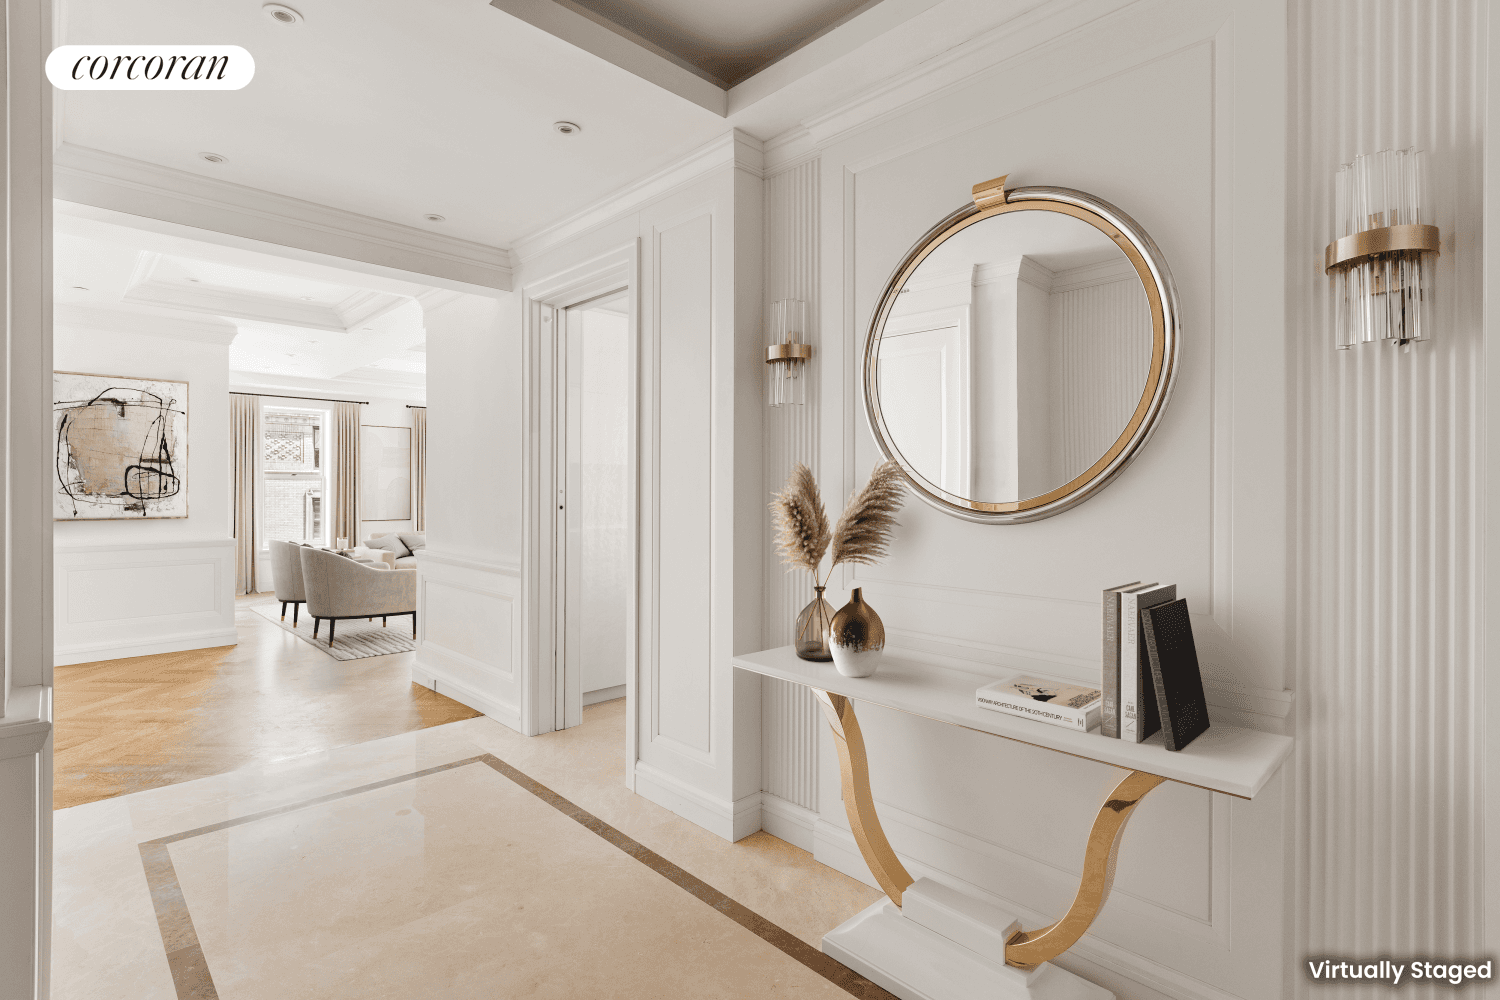 AN UPPER EAST SIDE LIFESTYLE OF PALATIAL PROPORTIONS5 BEDROOMS 5 BATHROOMS 1 POWDER ROOM 4, 258 INTERIOR SQFT 396 SQM 133 East 73rd Street presents the rare opportunity to live ...